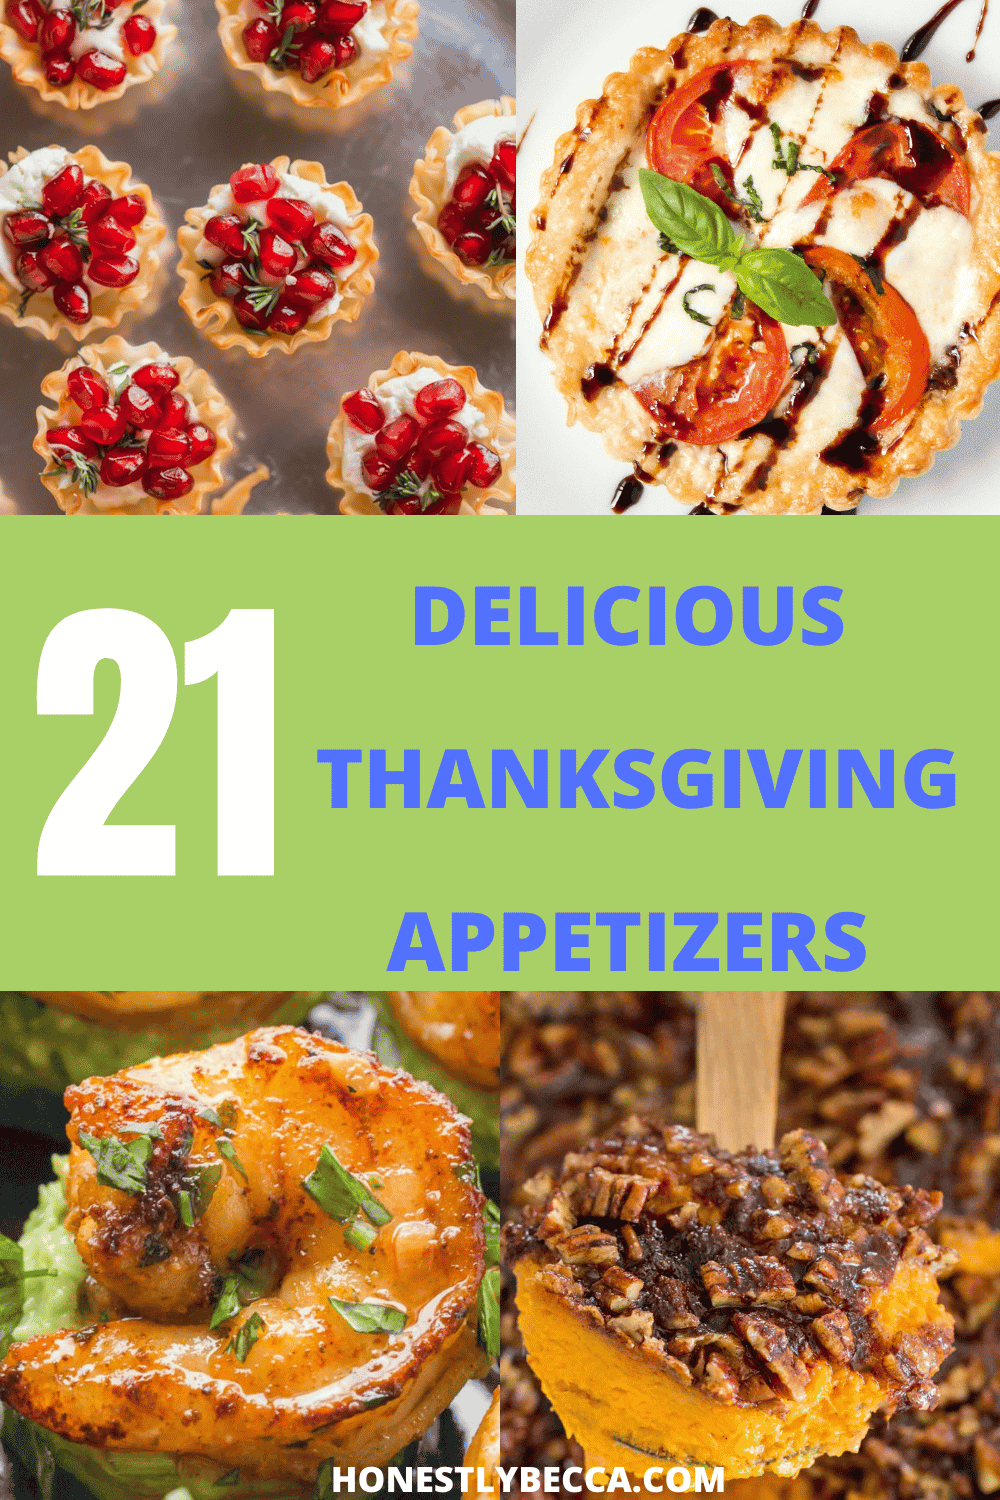 21 Delicious Thanksgiving Appetizers Perfect For A Crowd. - HONESTLYBECCA